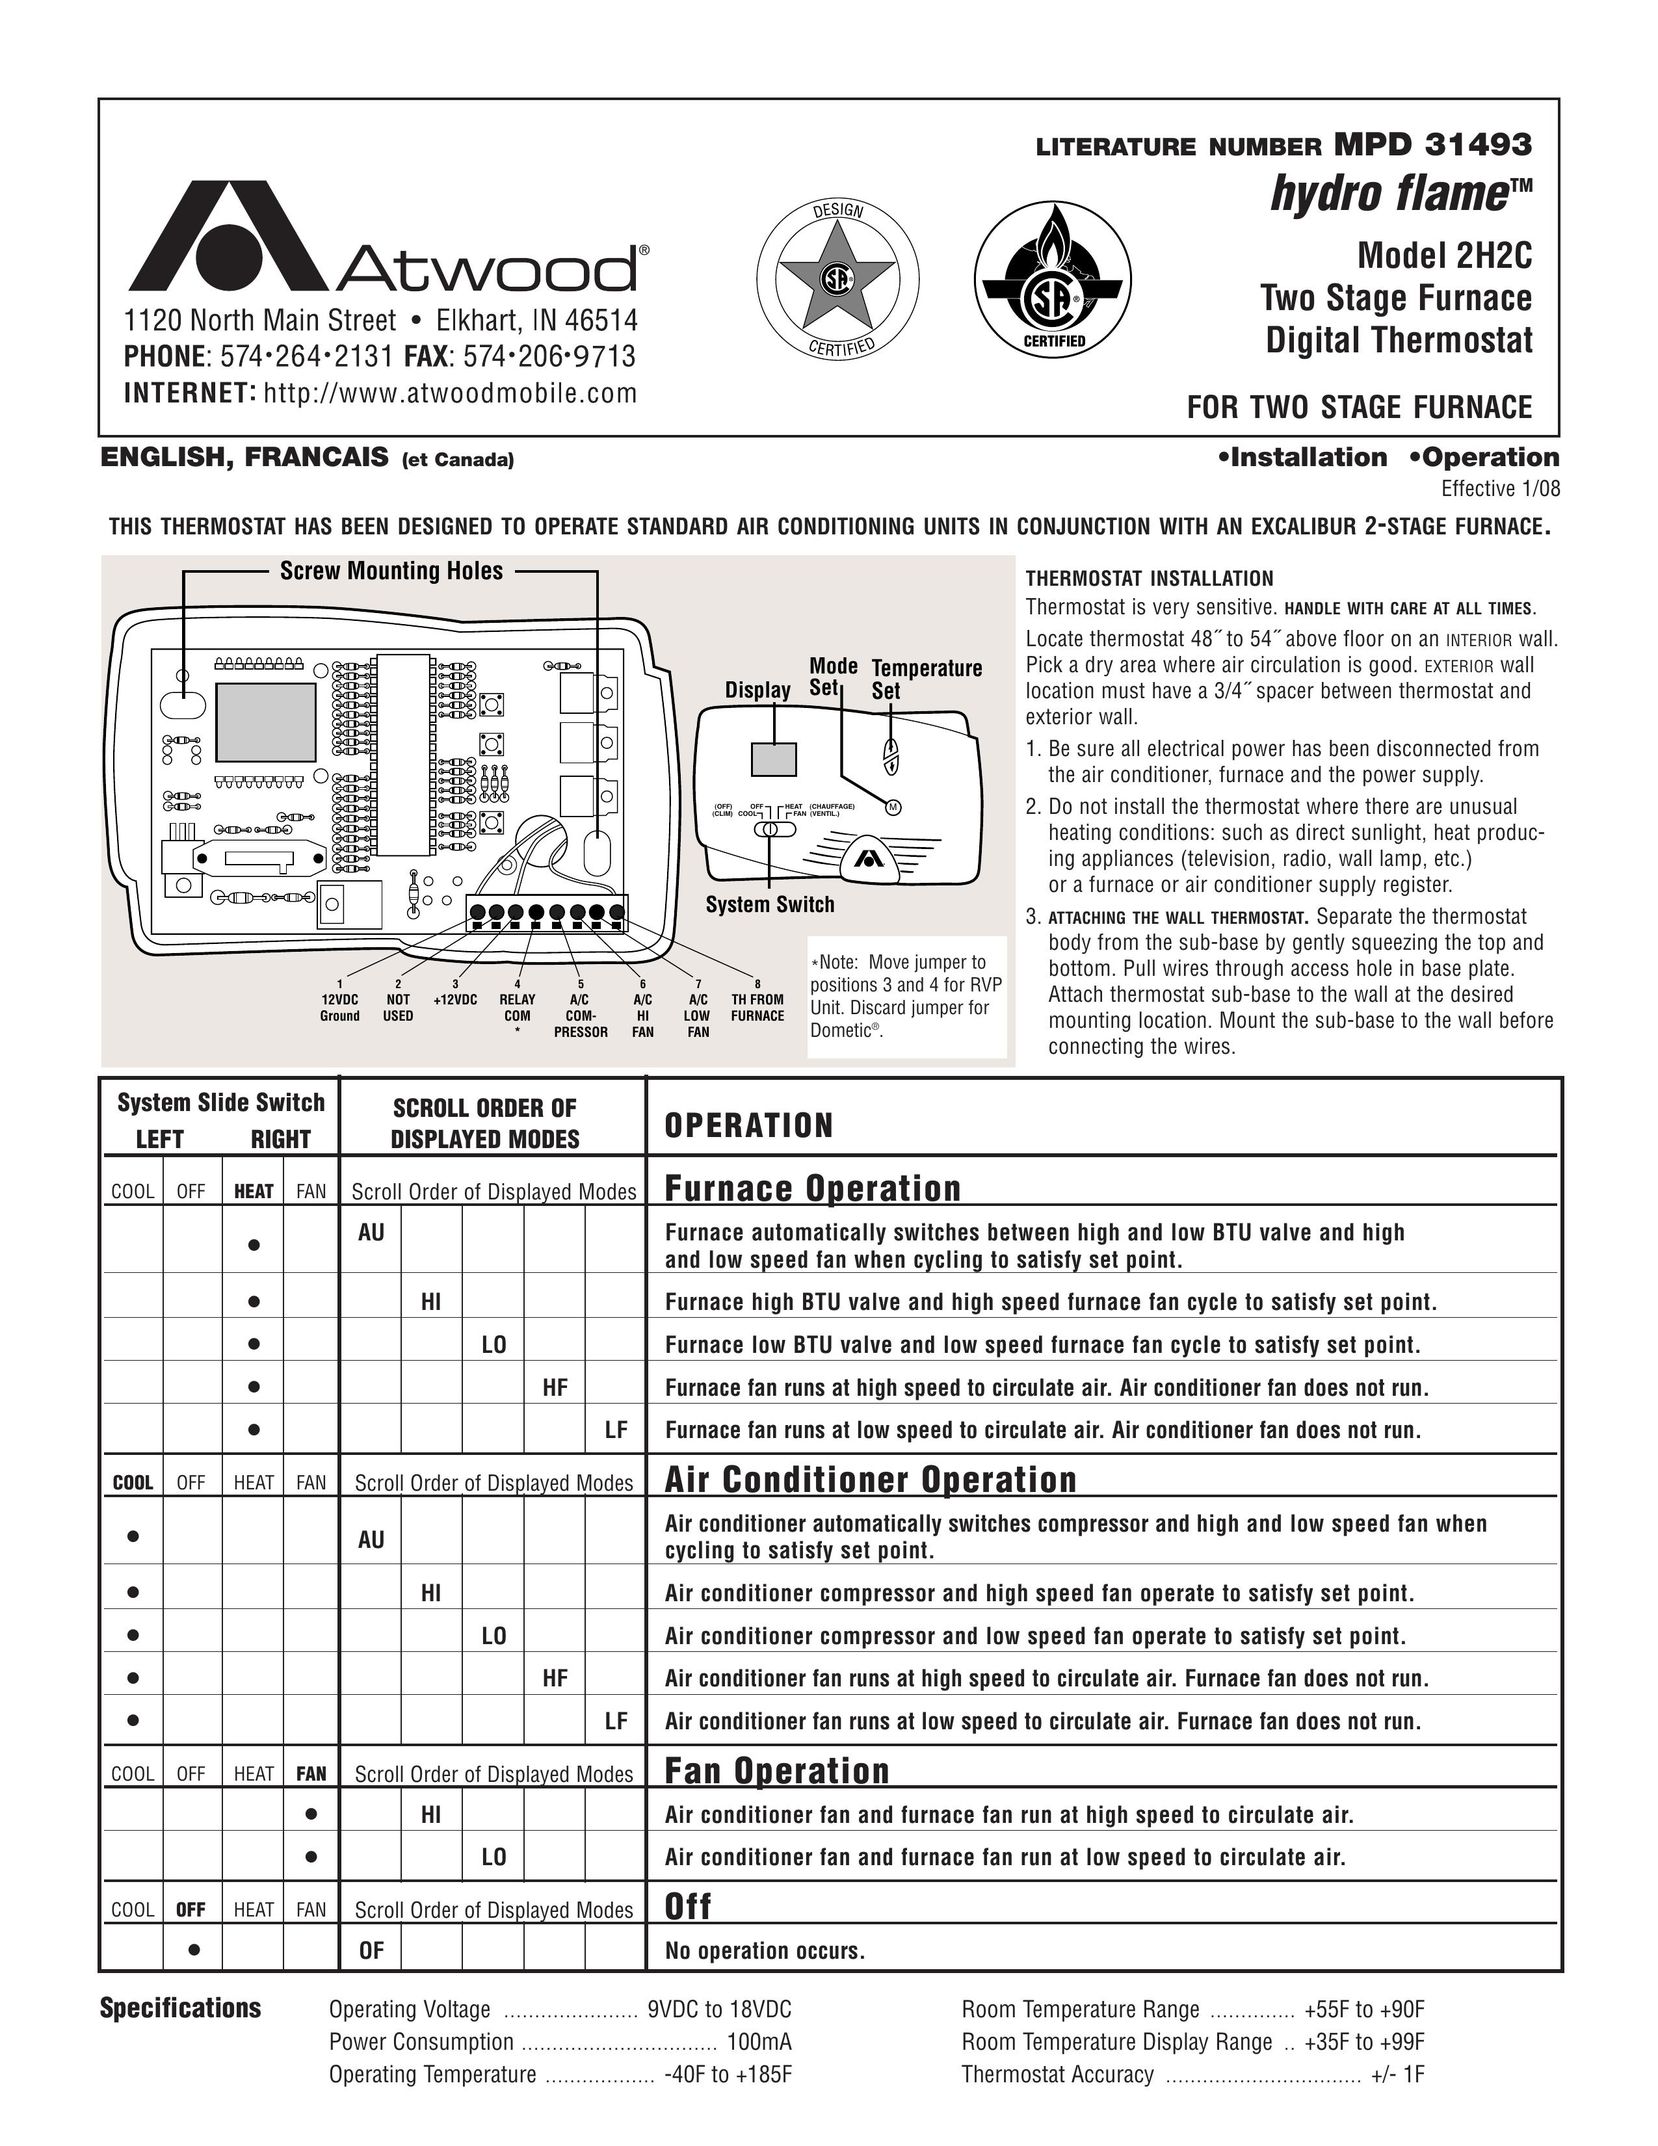 Atwood Mobile Products 2H2C Thermostat User Manual